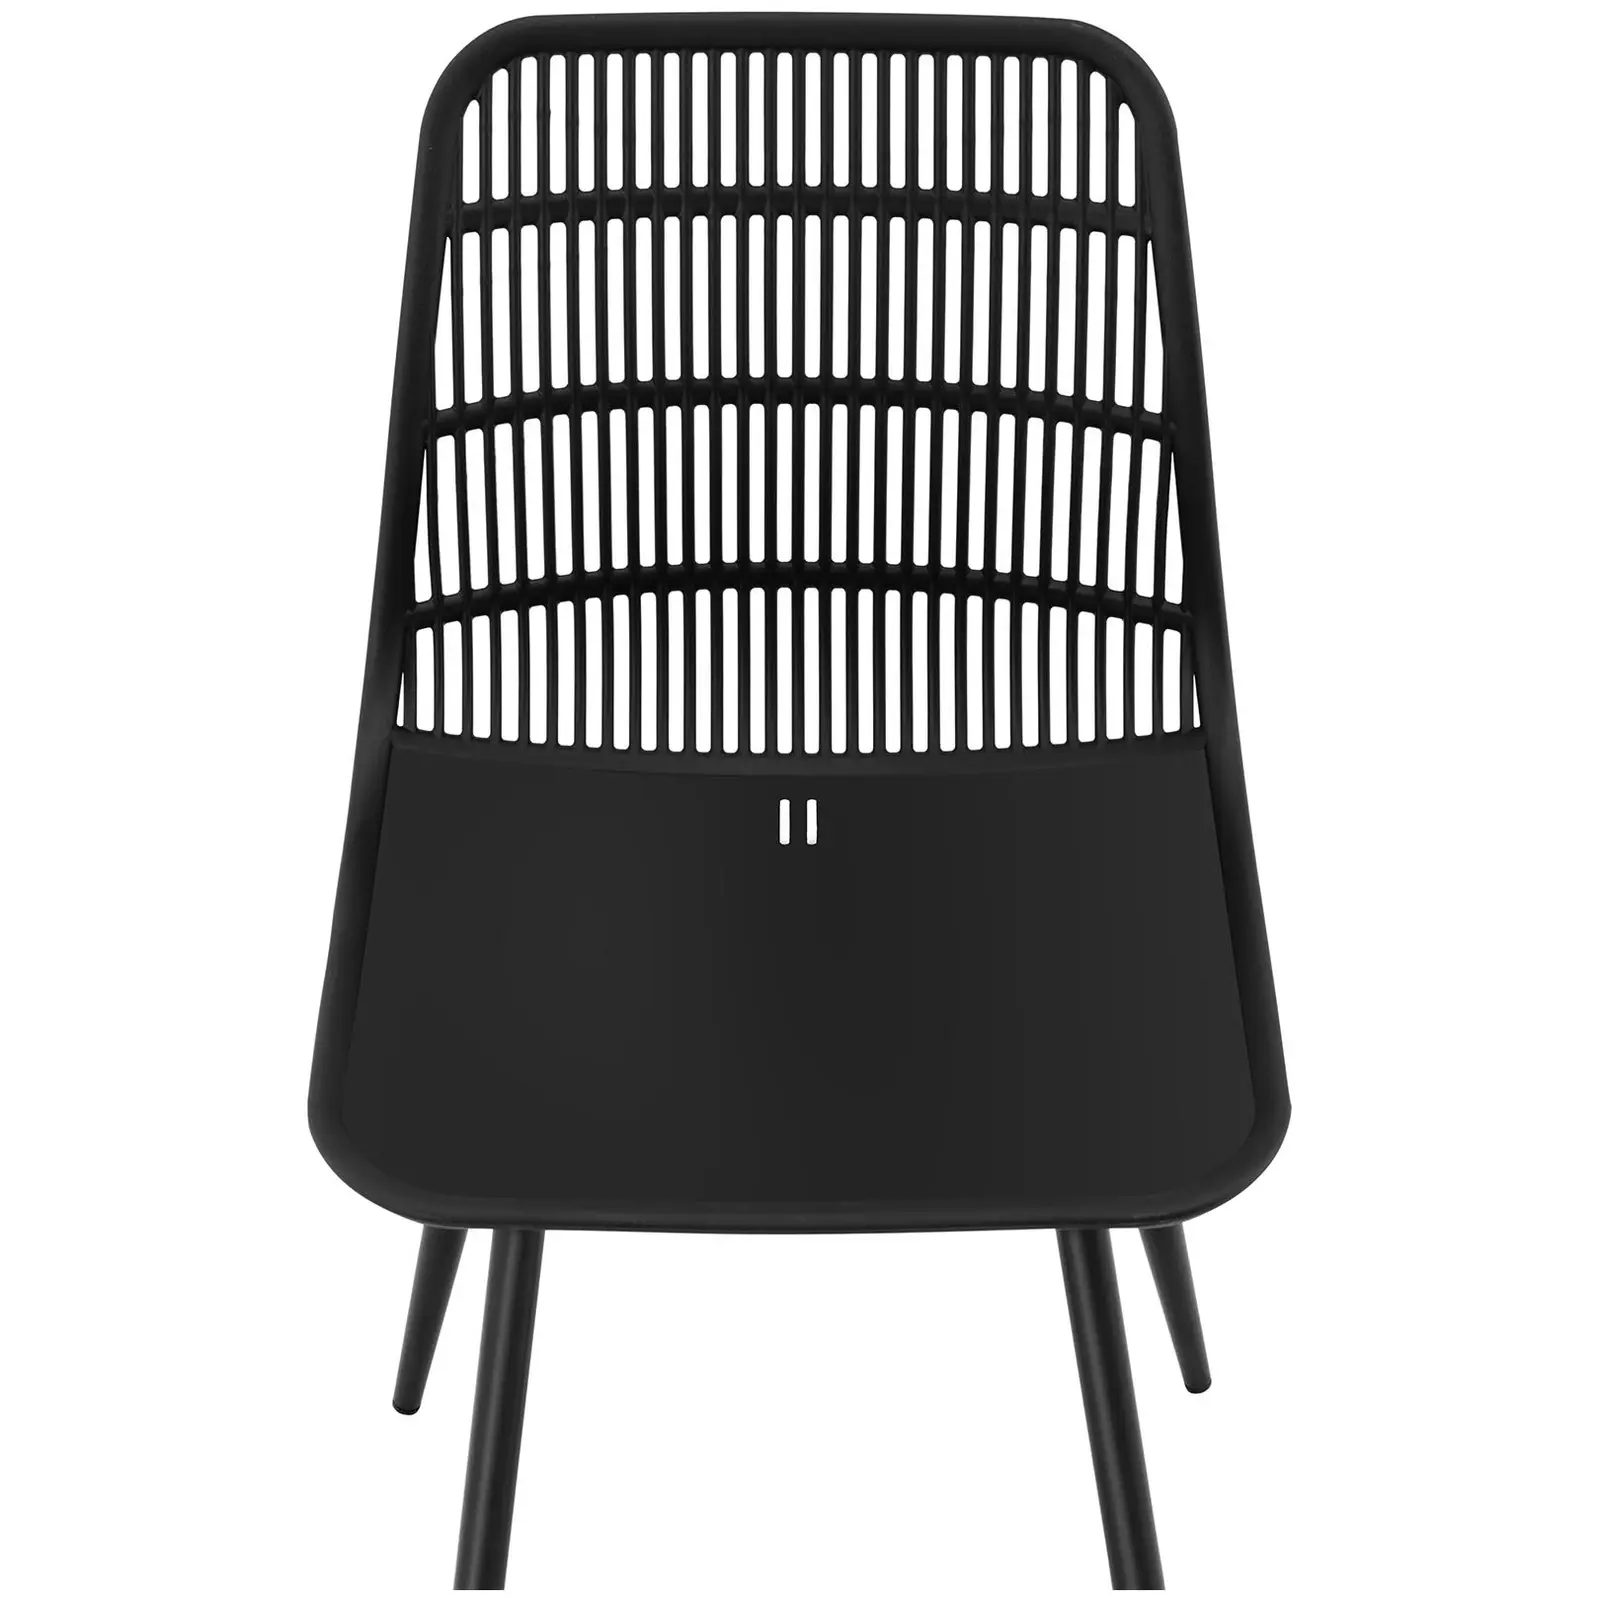 Chair - set of 4 - up to 150 kg - seat 46.5 x 45.5 cm - black